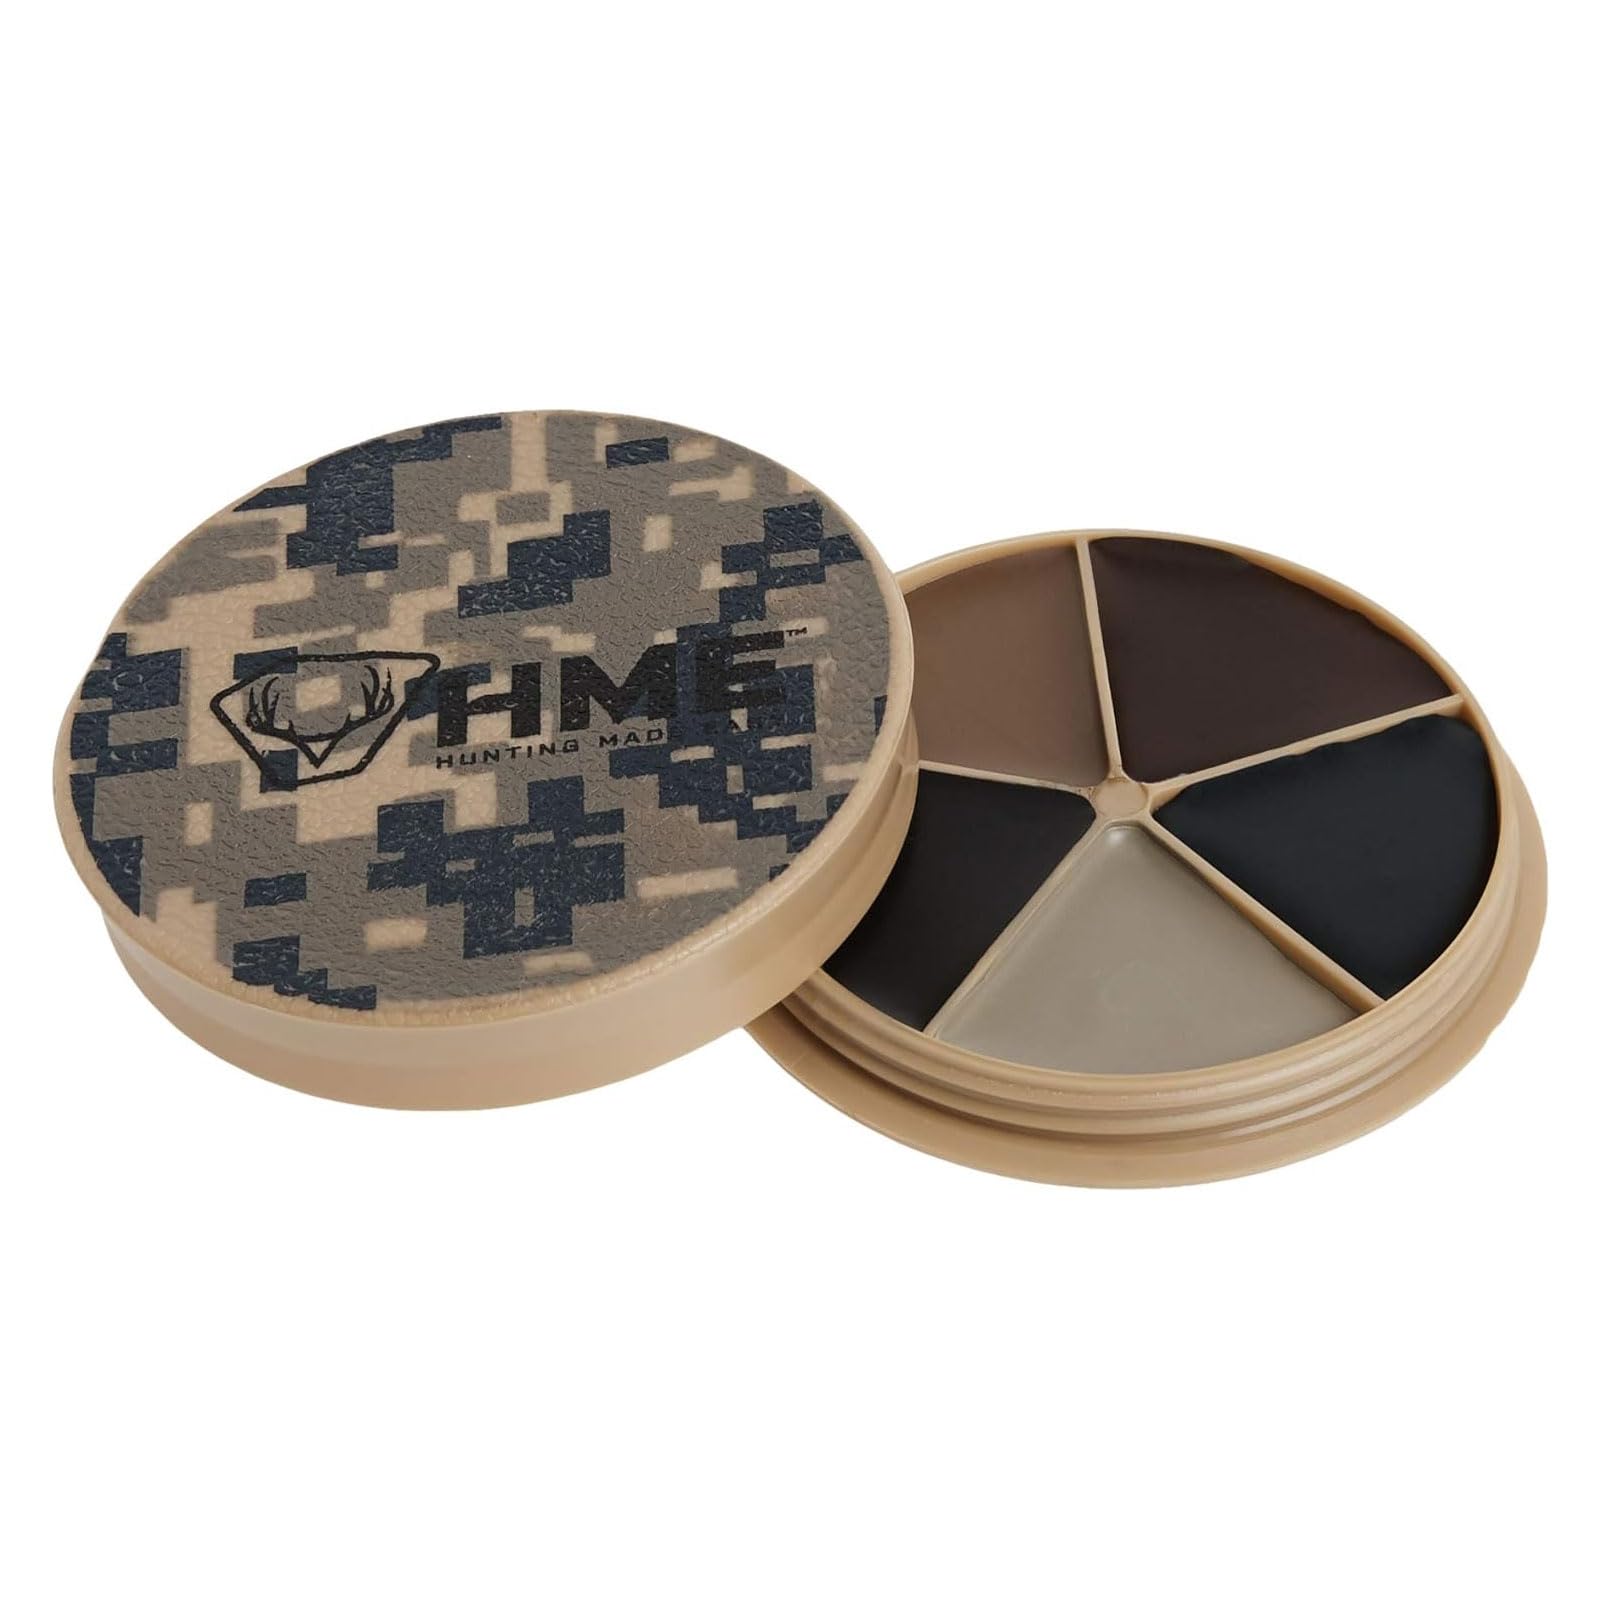 HME Camo Face Paint Kit with Mirror - Long-Lasting Non-Glare Easy-to-Use Concealment Makeup for Hunting in Compact Case, 5 Colors